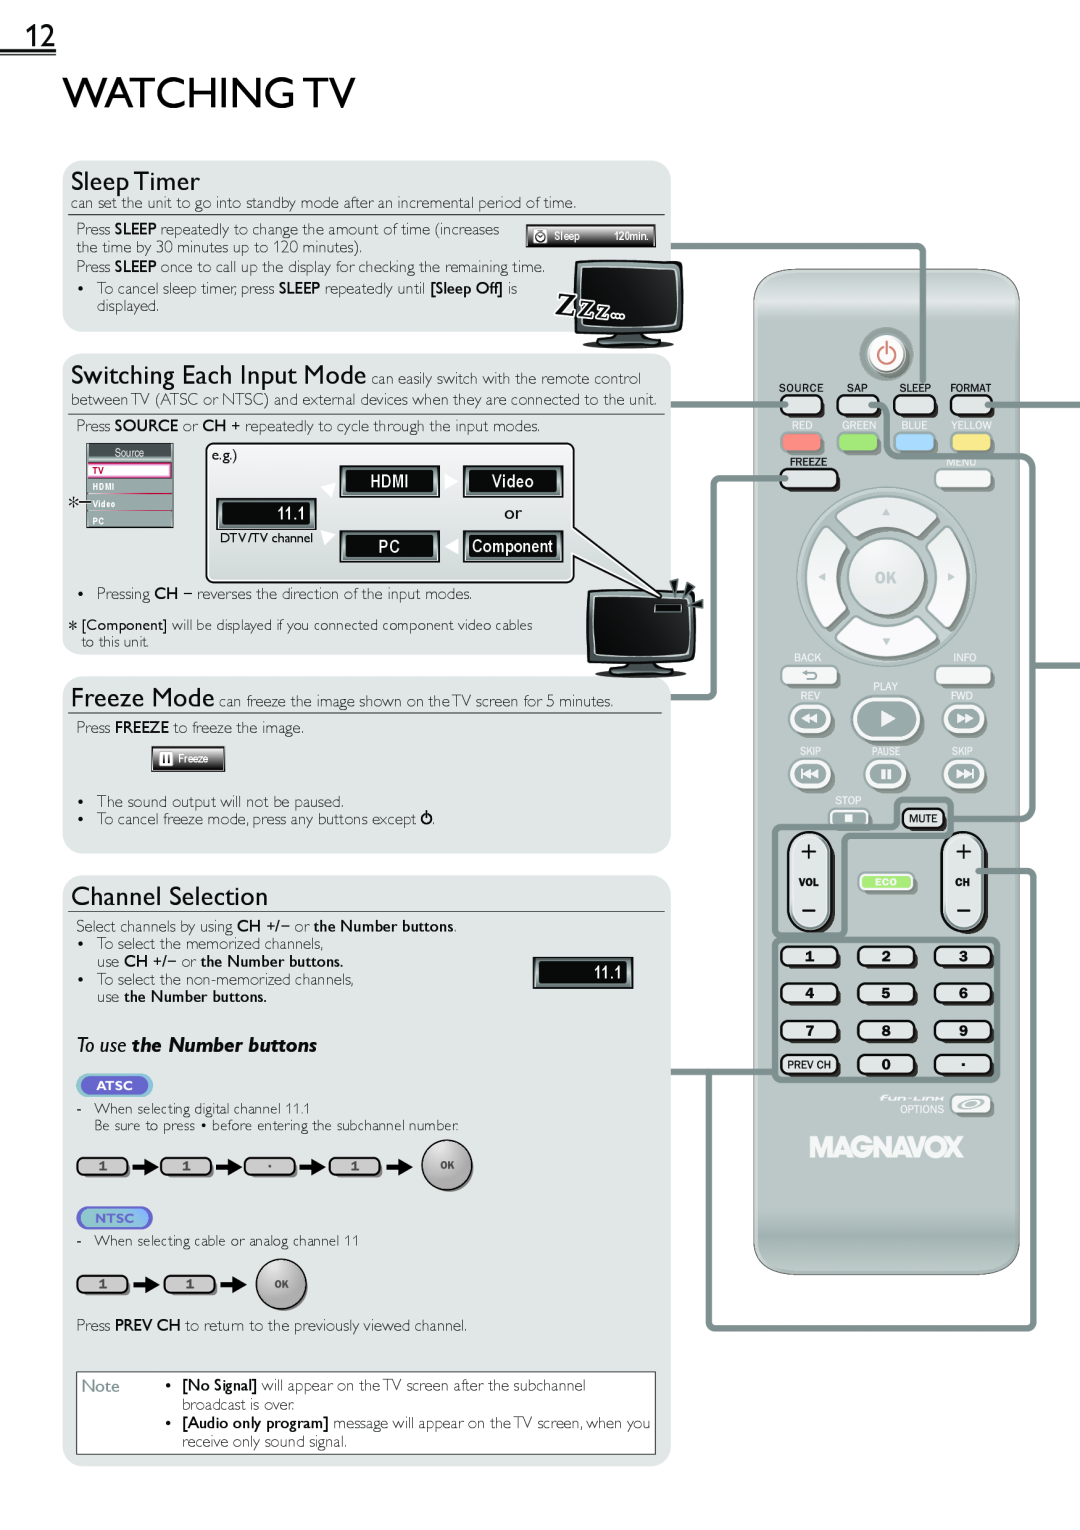 Magnavox 1-866-341-3738 Watching Tv, Sleep Timer, Channel Selection, To use the Number buttons, Hdmi, Video, 11.1 